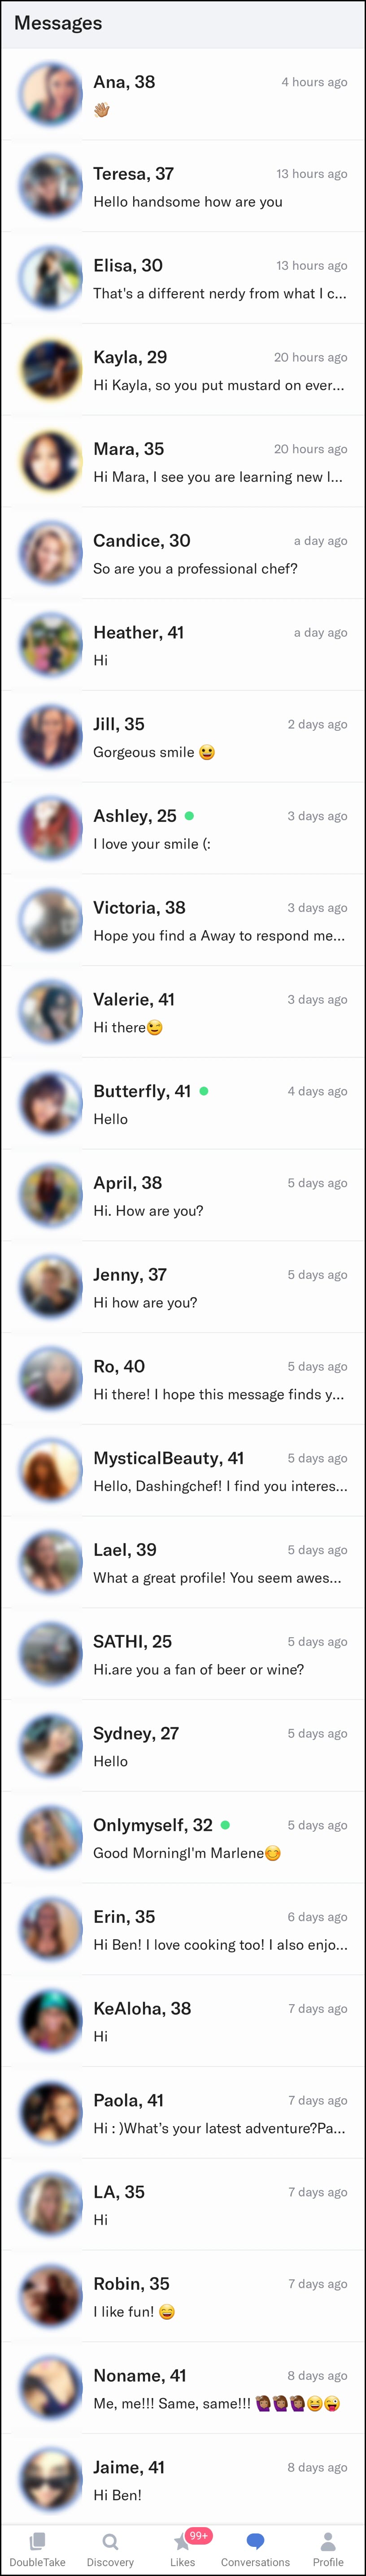 An inbox of messages from women after revised dating profile on OkCupid